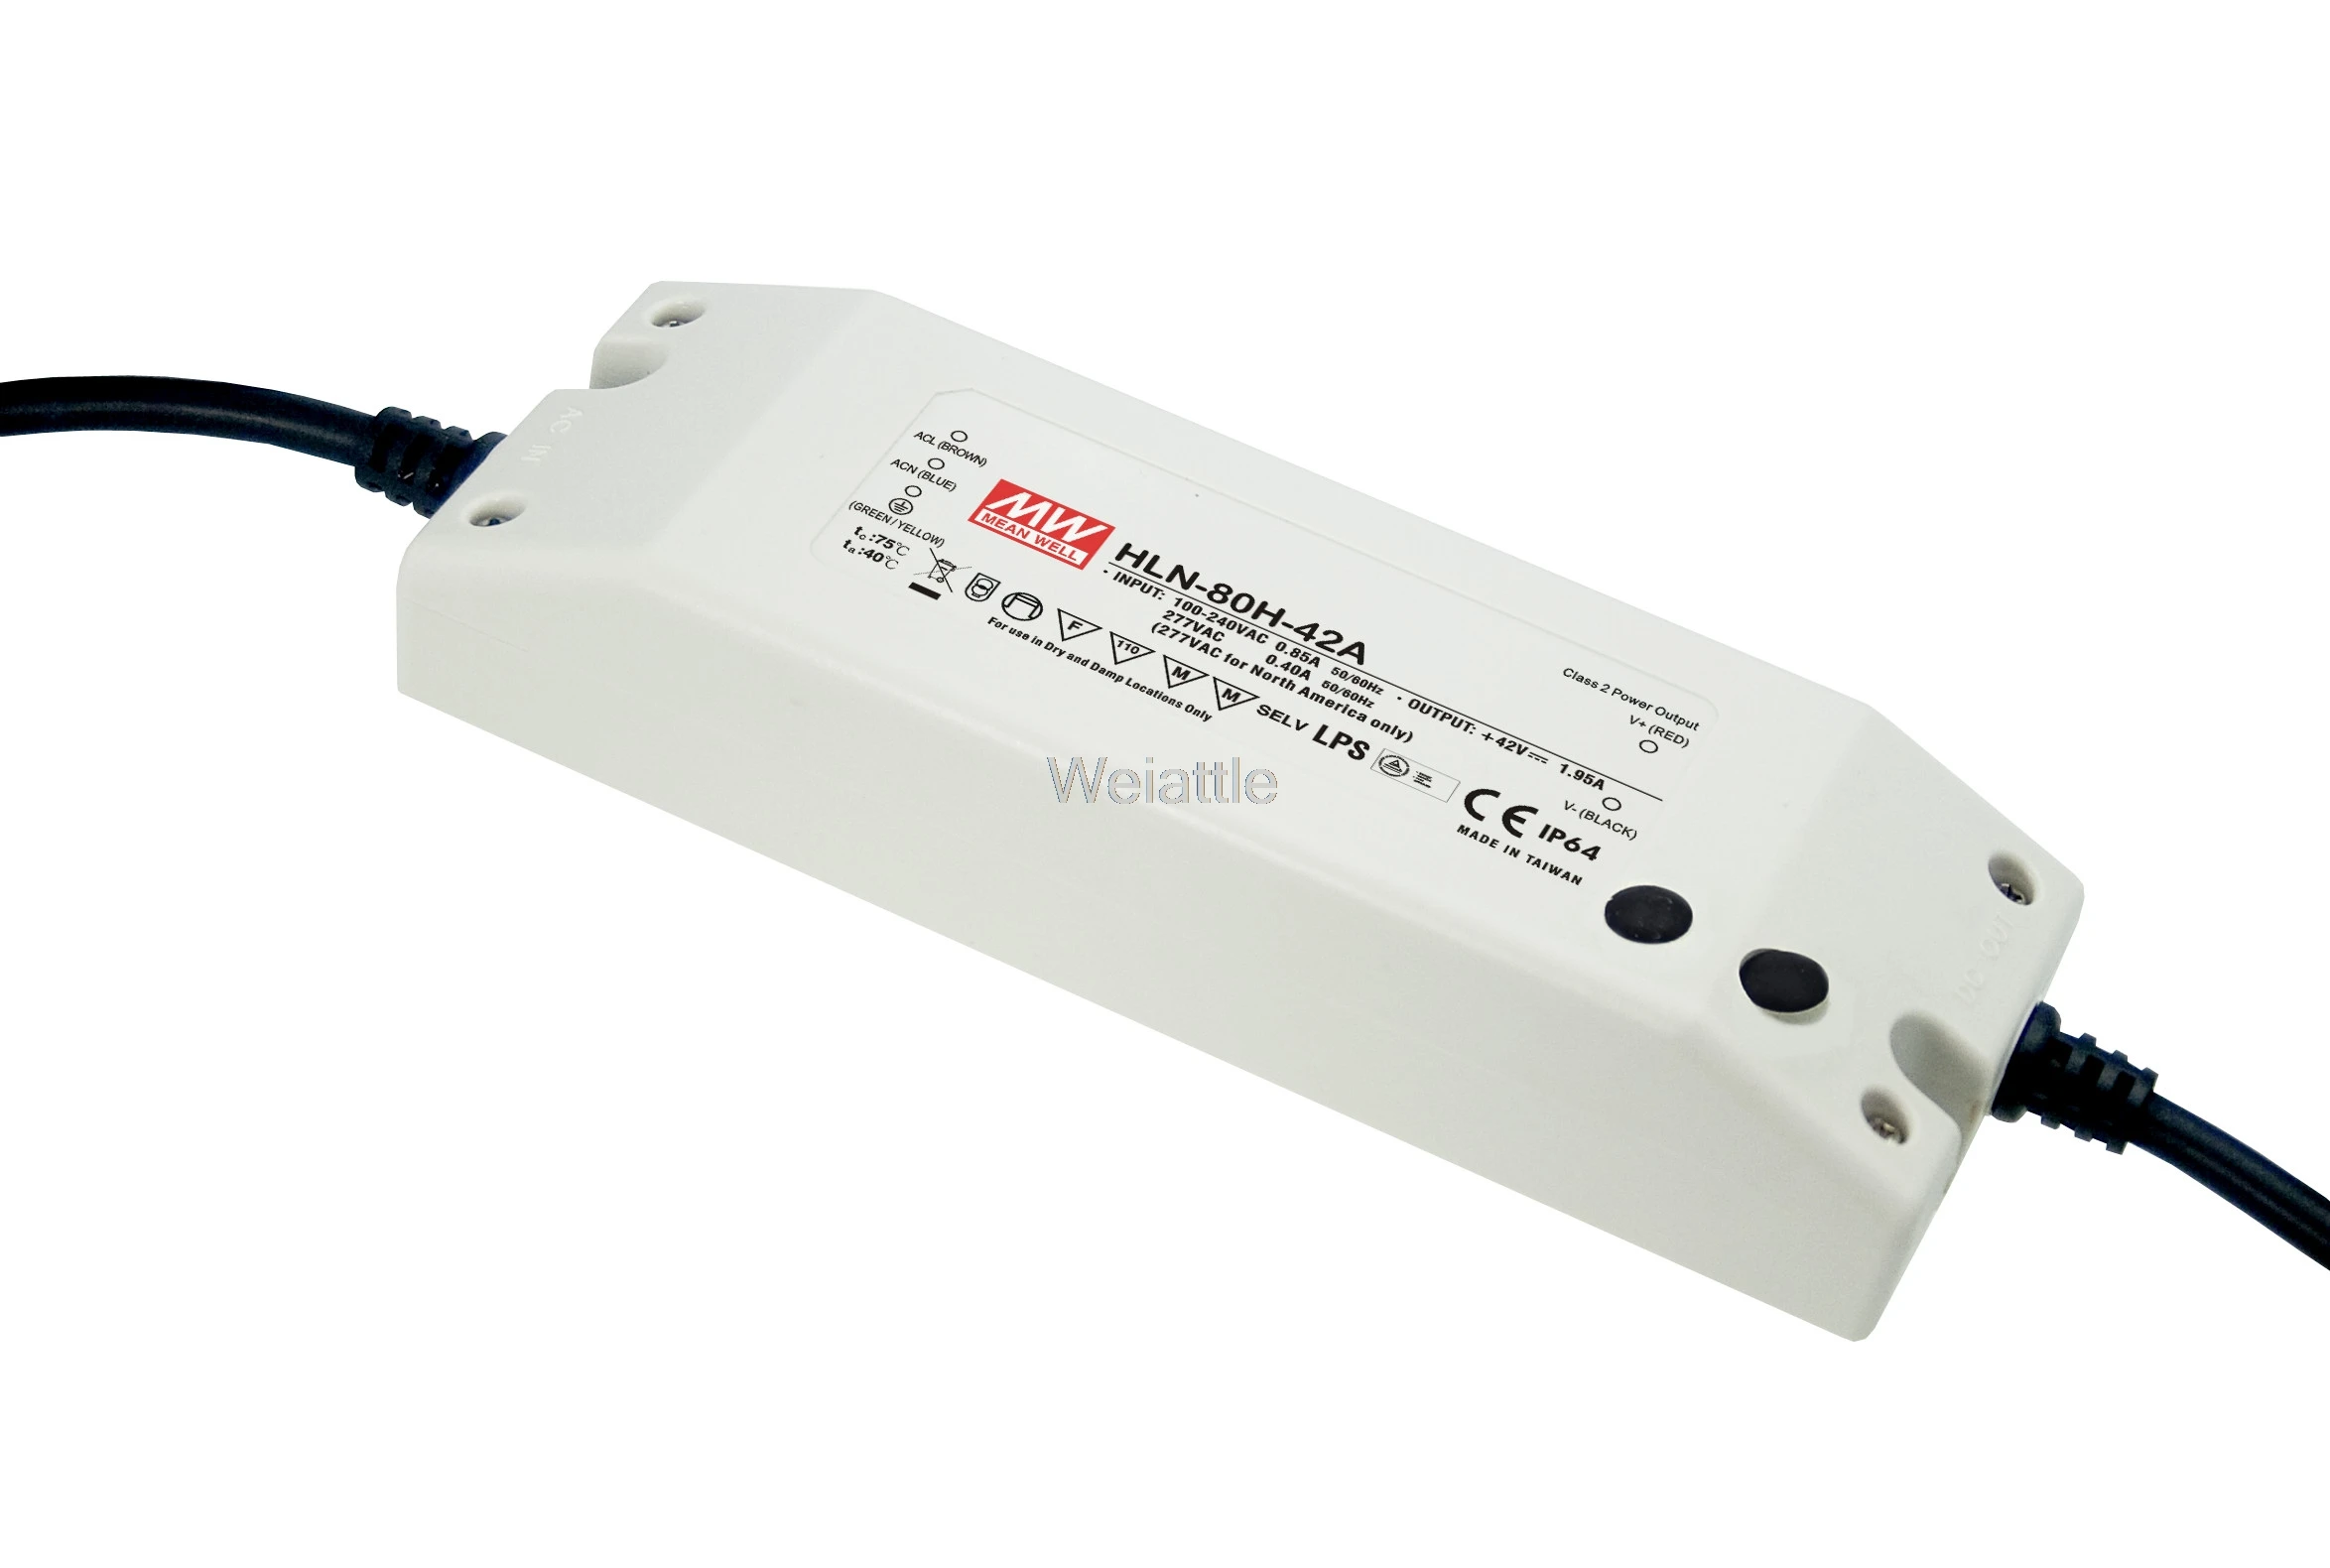 POWERNEX MEAN WELL NEW HLG-150H-54B 54V 2.8A 150W LED Driver Power Supply B